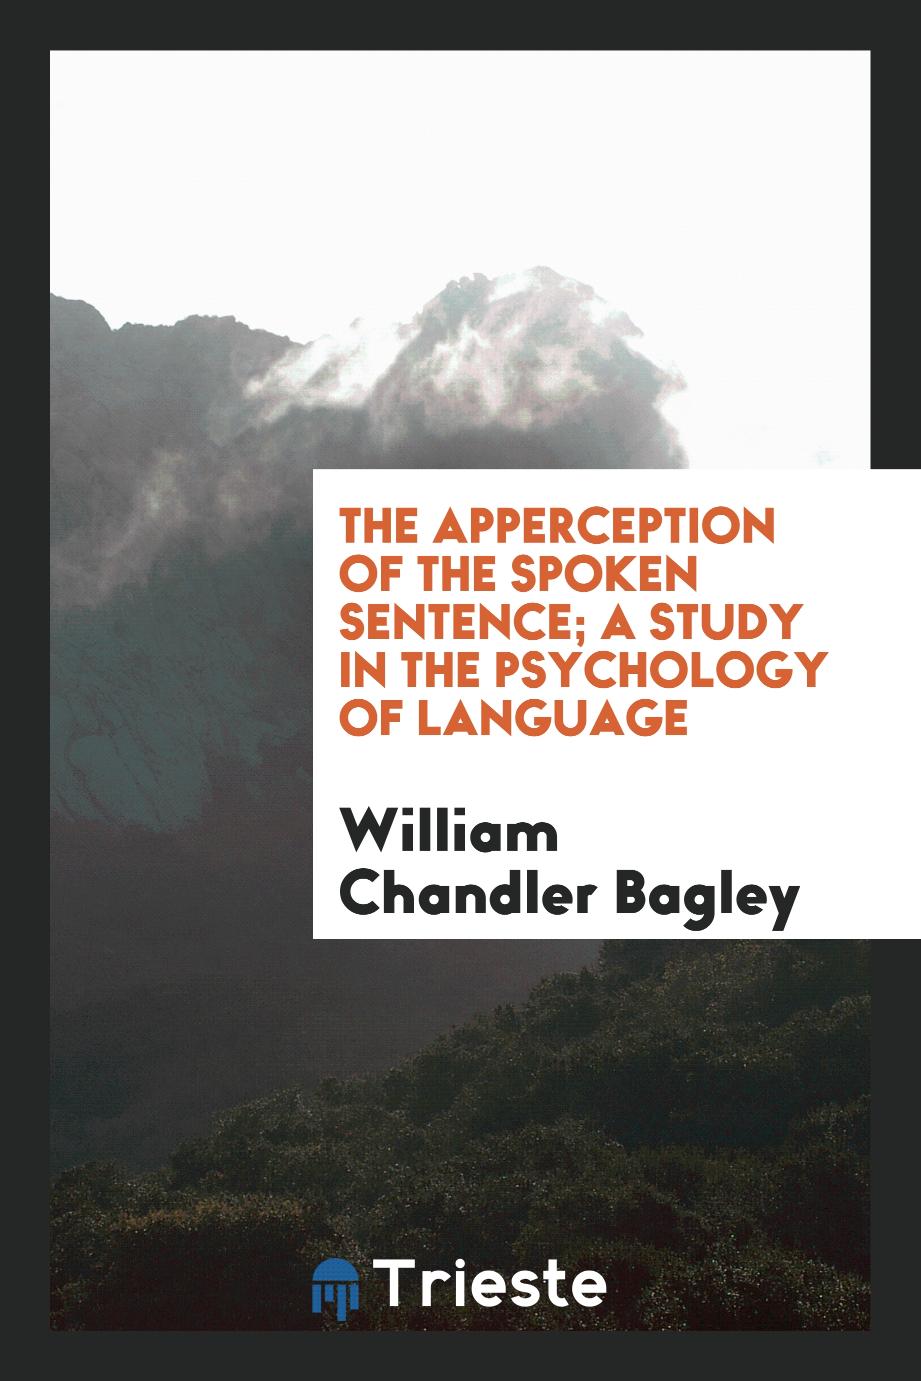 The apperception of the spoken sentence; a study in the psychology of language